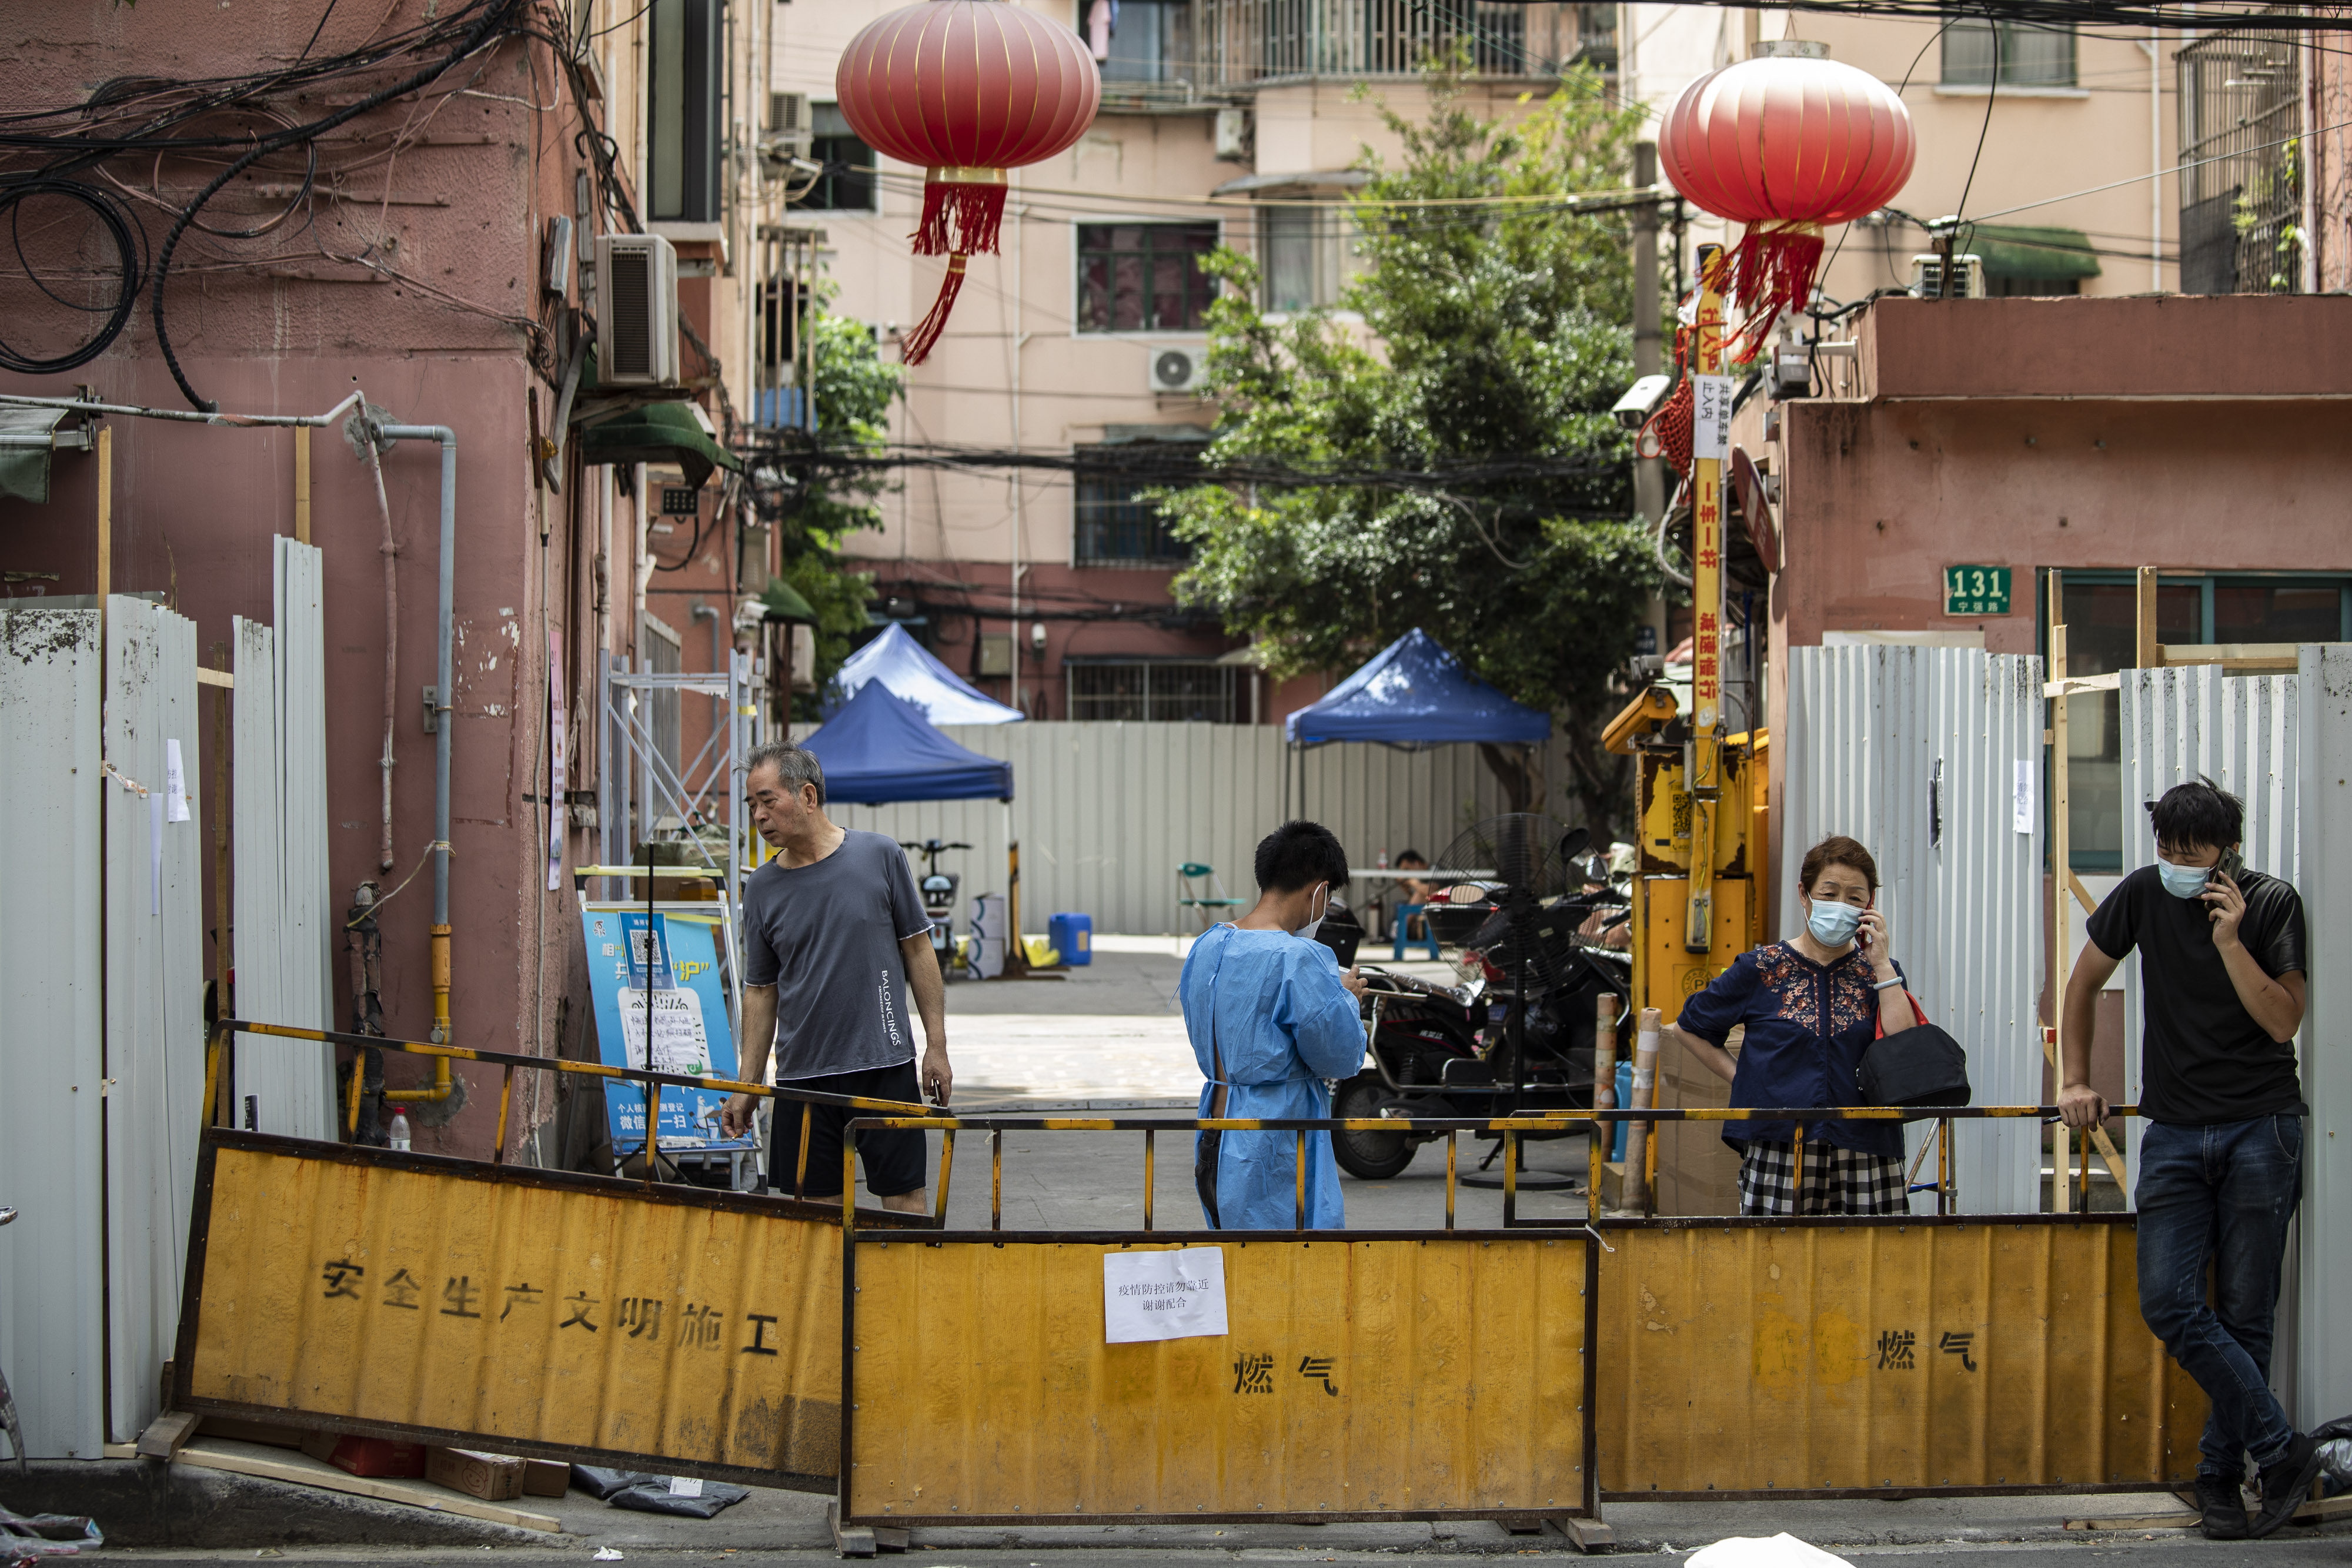 Residents behind barriers surrounding a residential neighborhood placed under lockdown due to Covid-19 in Shanghai on July 6, 2022. Shanghai launched mass testing for Covid in nine districts after detecting cases the past two days. Photo: Bloomberg